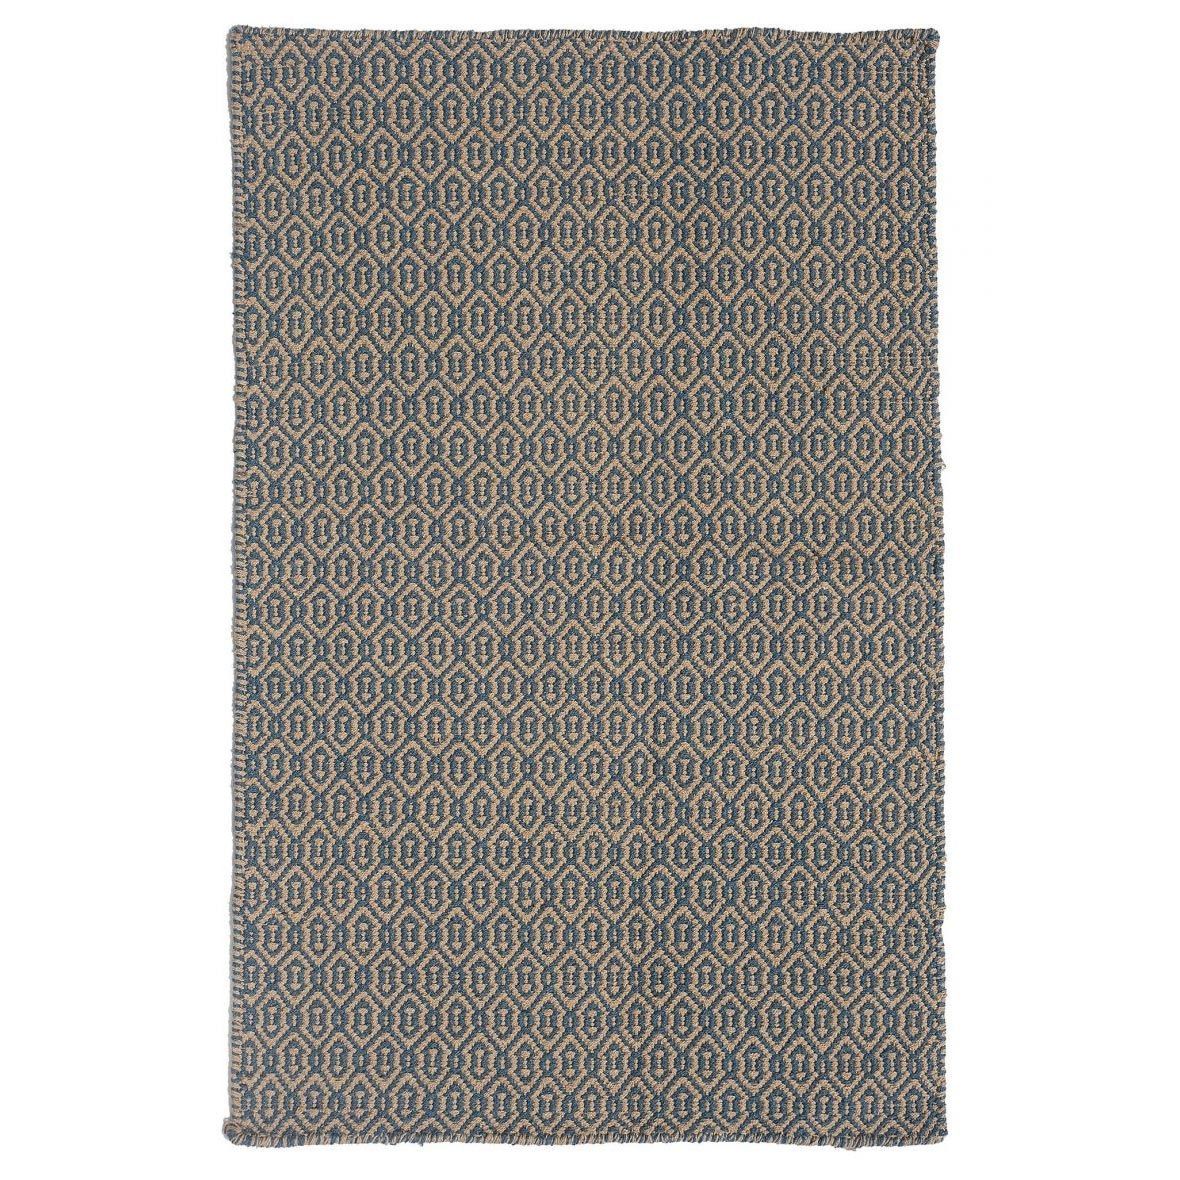 18 Best Washable Rugs To In 2021, Are Ruggable Rugs Really Washable